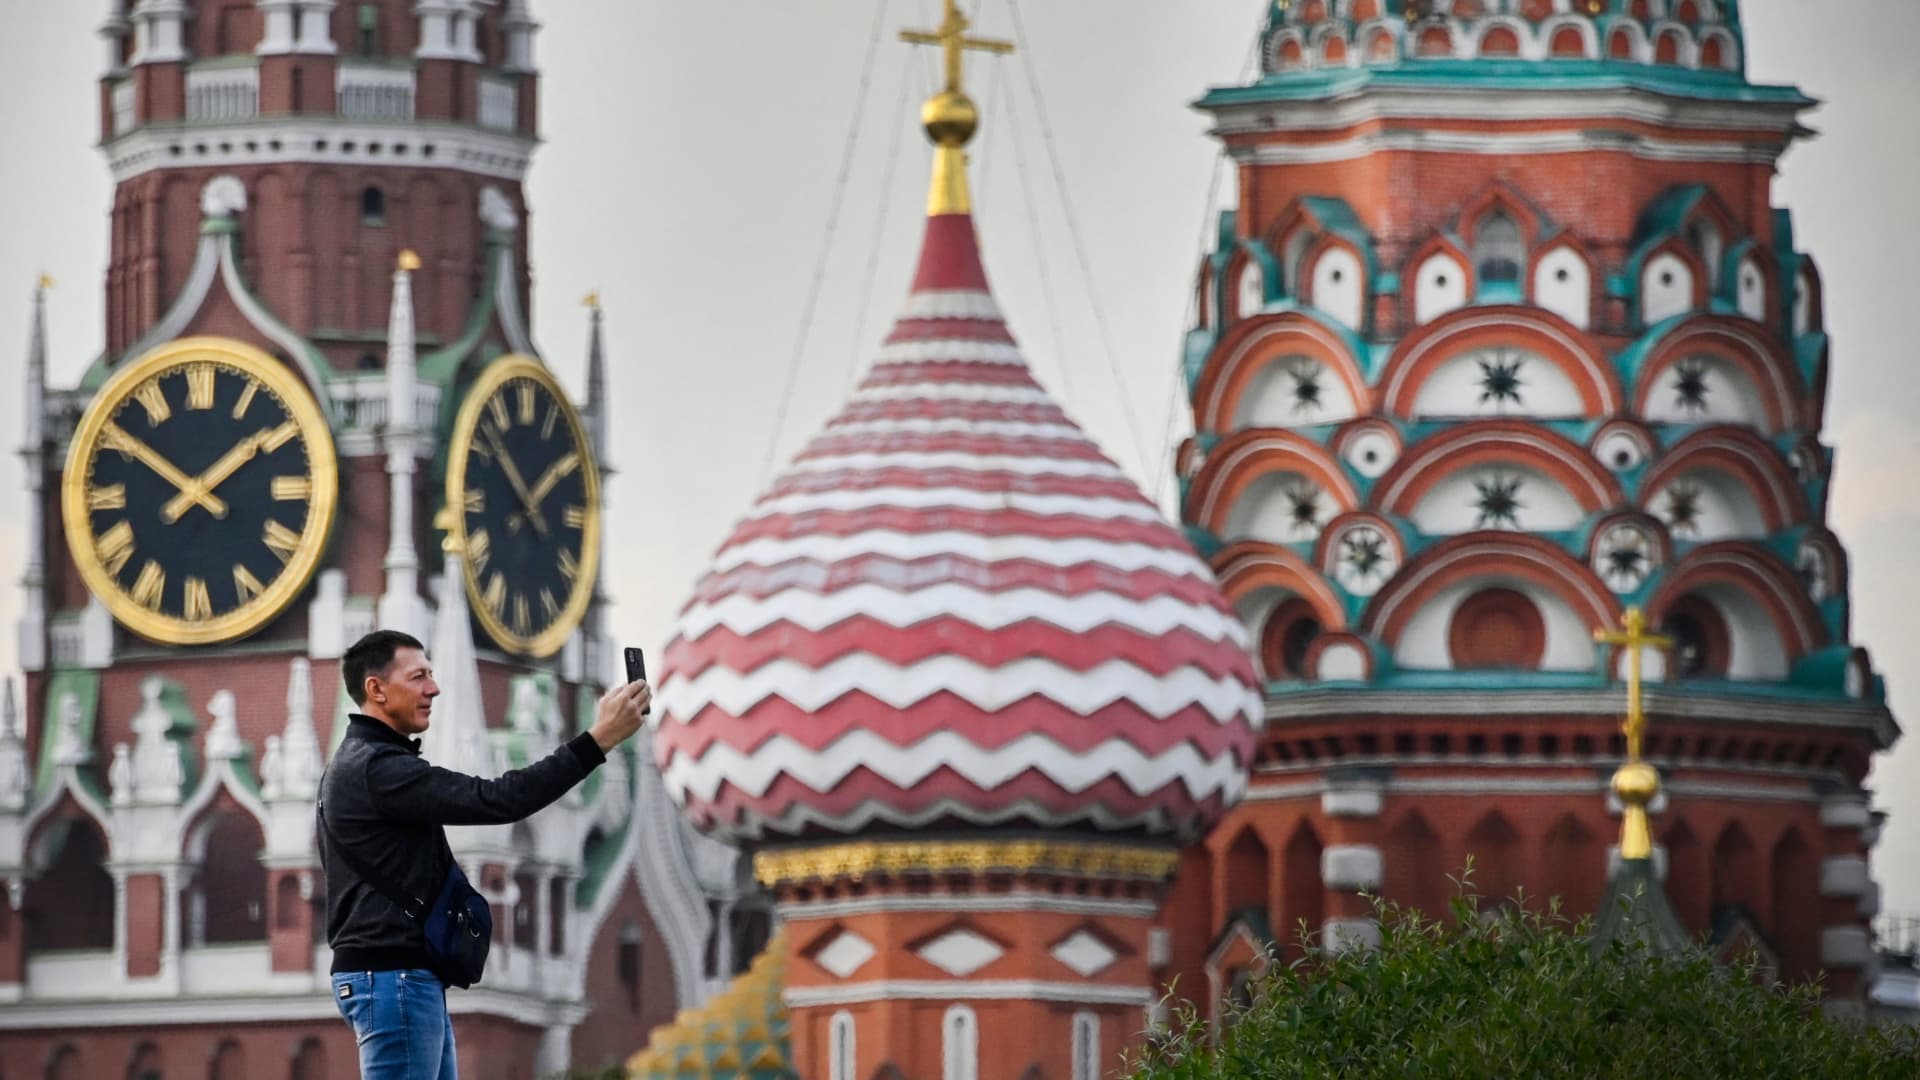 A man makes a selfie photo in front of the Kremlin's Spasskaya tower and St. Basil's cathedral in downtown Moscow on September 11, 2023. Russia's Elections Commission said that the pro-Kremlin United Russia part had won local elections in four regions of Ukraine occupied by Russian forces, in a vote dismissed by Kyiv. (Photo by Alexander NEMENOV / AFP) (Photo by ALEXANDER NEMENOV/AFP via Getty Images)